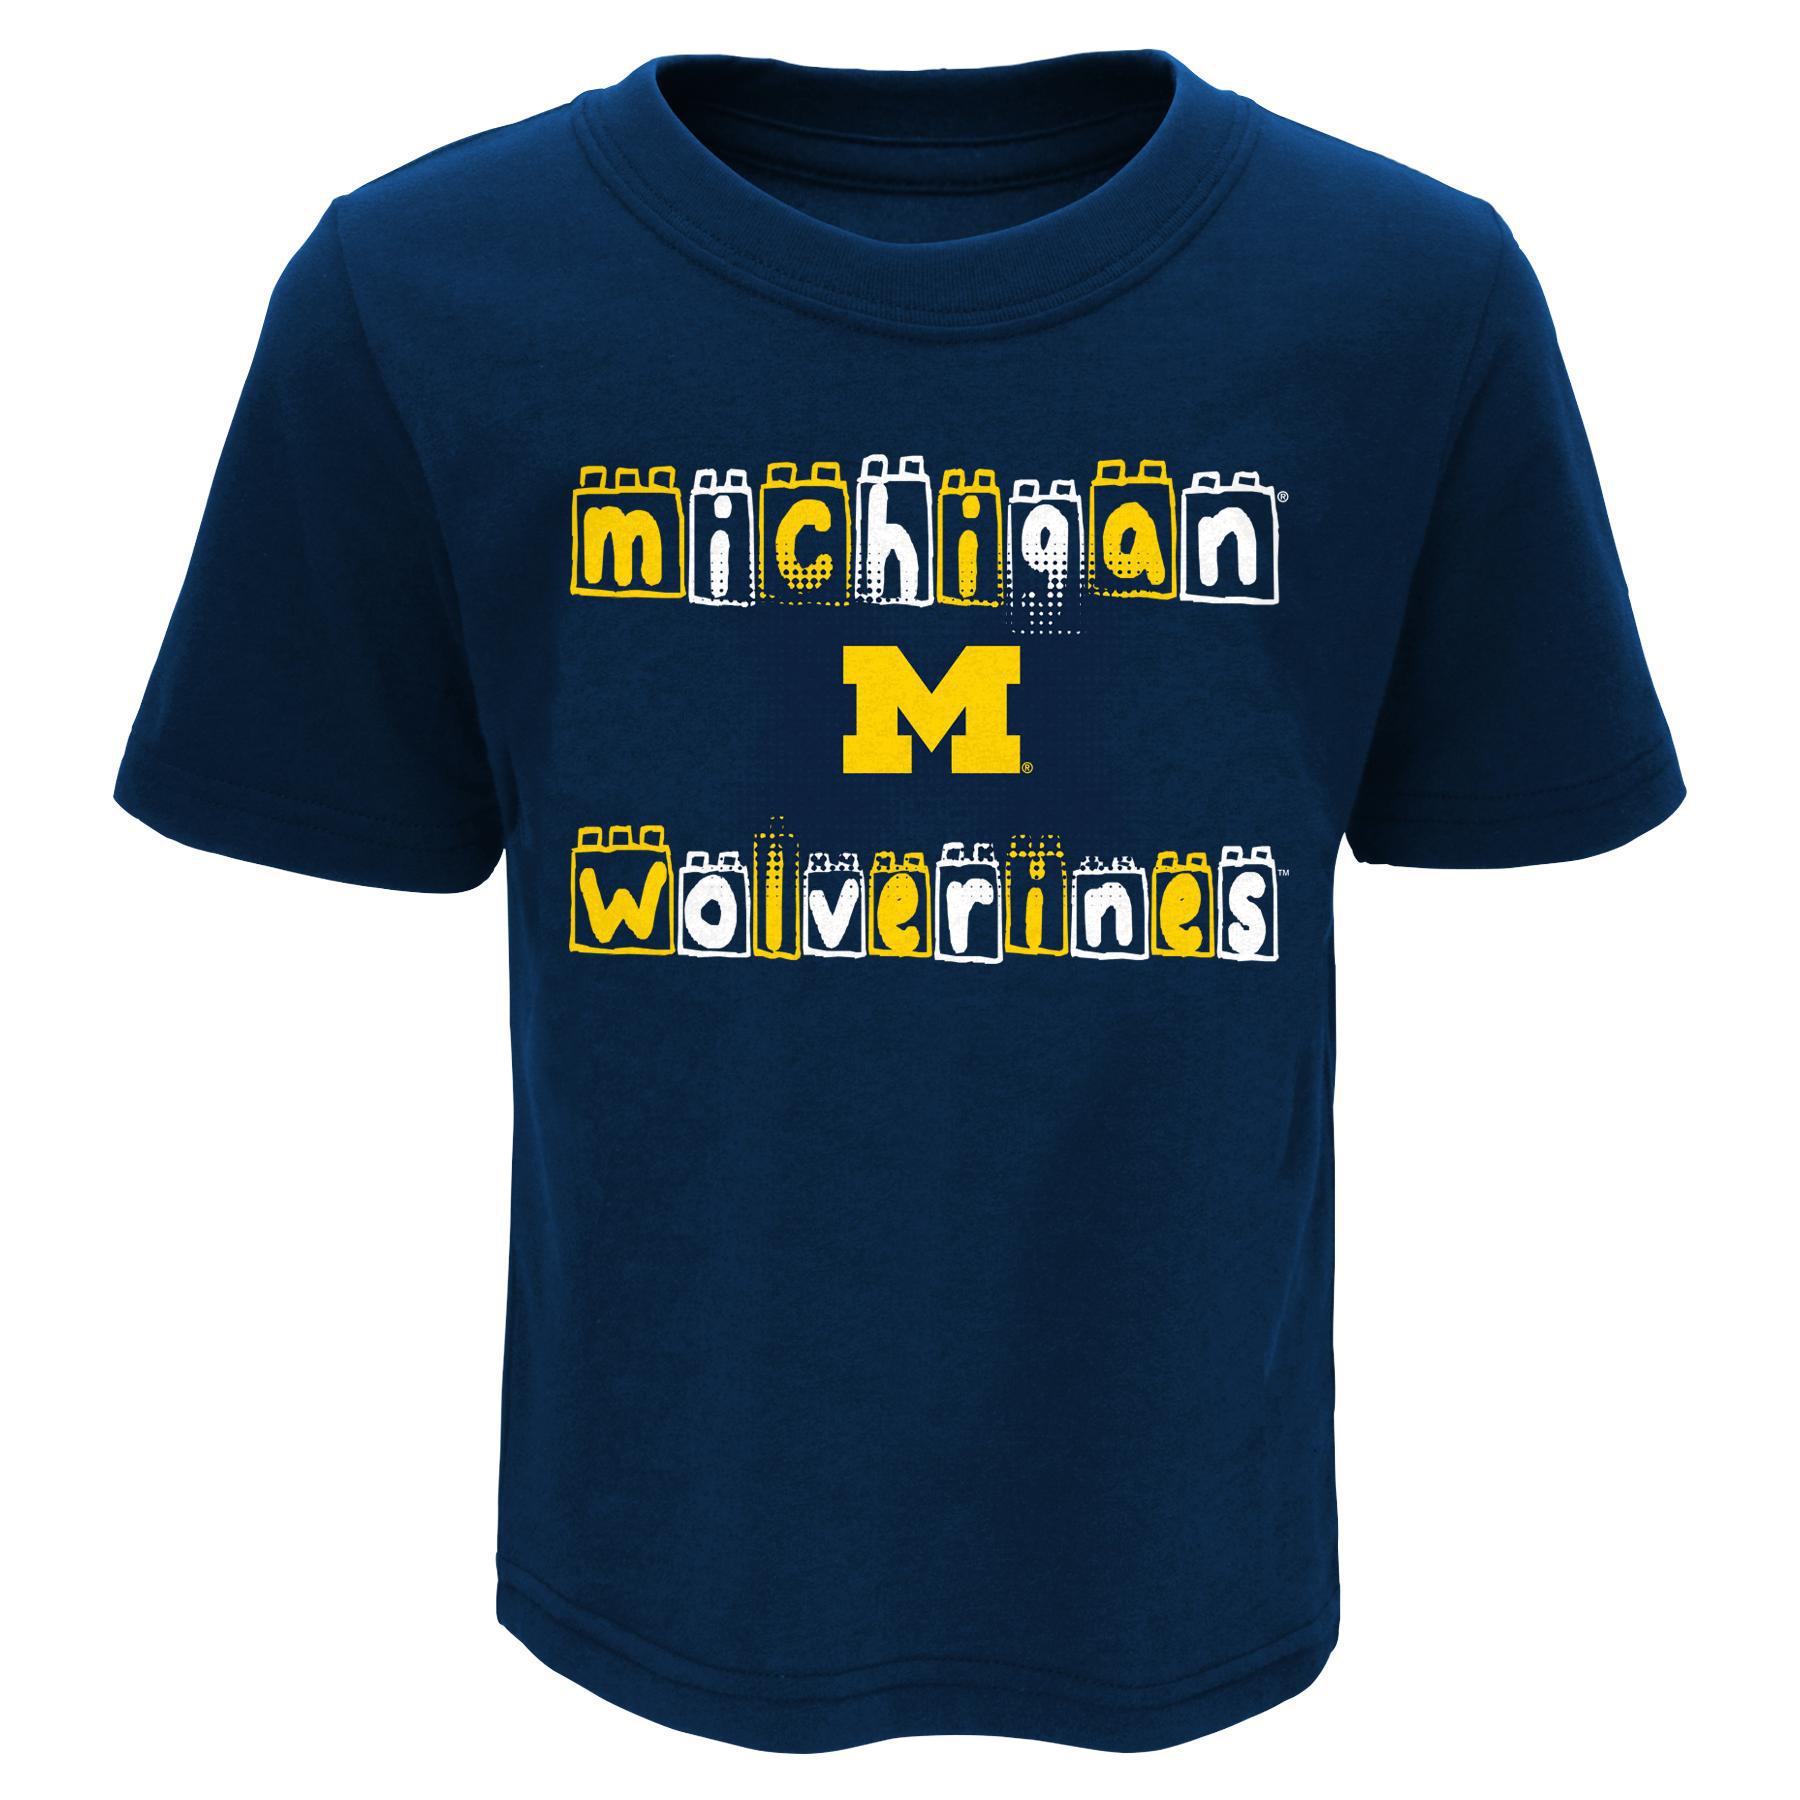 NCAA Toddler's Graphic T-Shirt - Michigan Wolverines